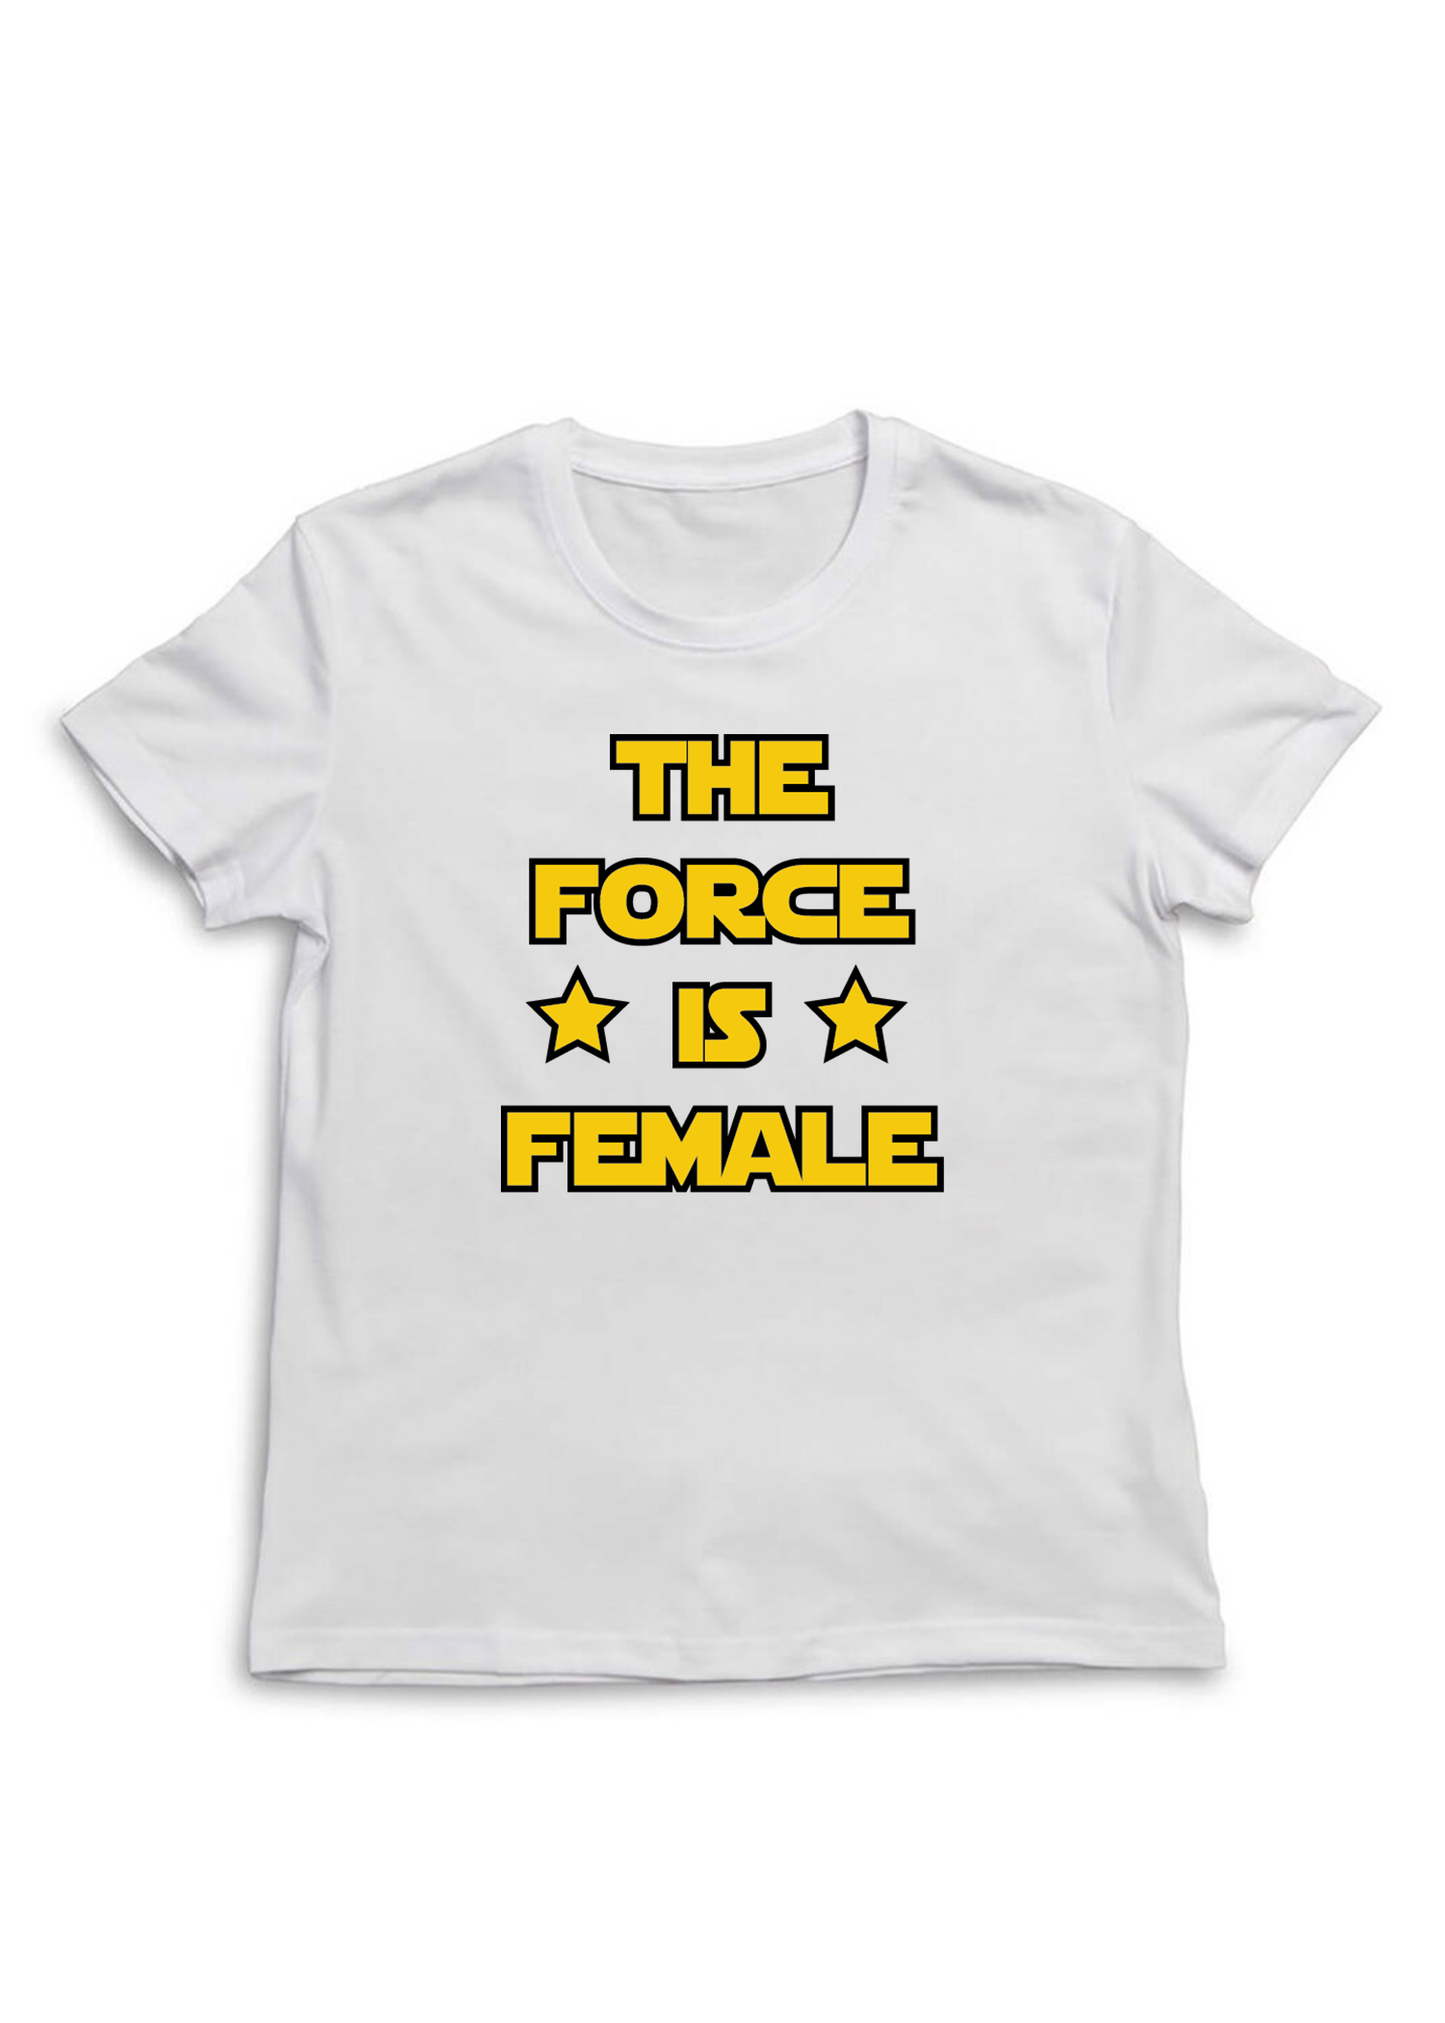 The Force Female T-Shirt